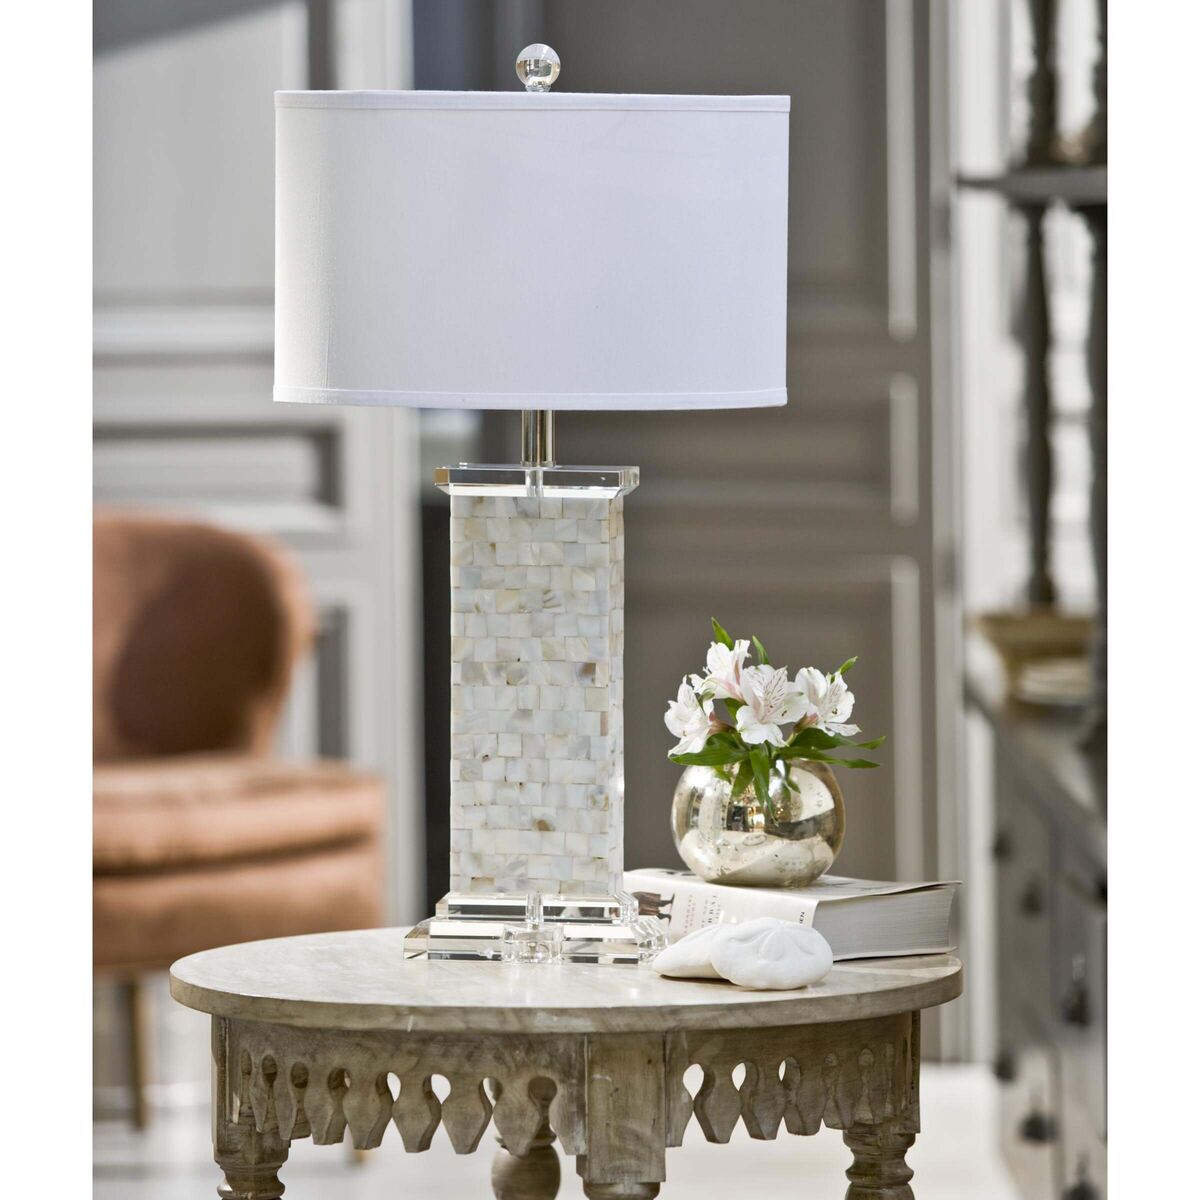 Mother-of-pearl gains extra luminosity when used on lighting, as with this table lamp.  
